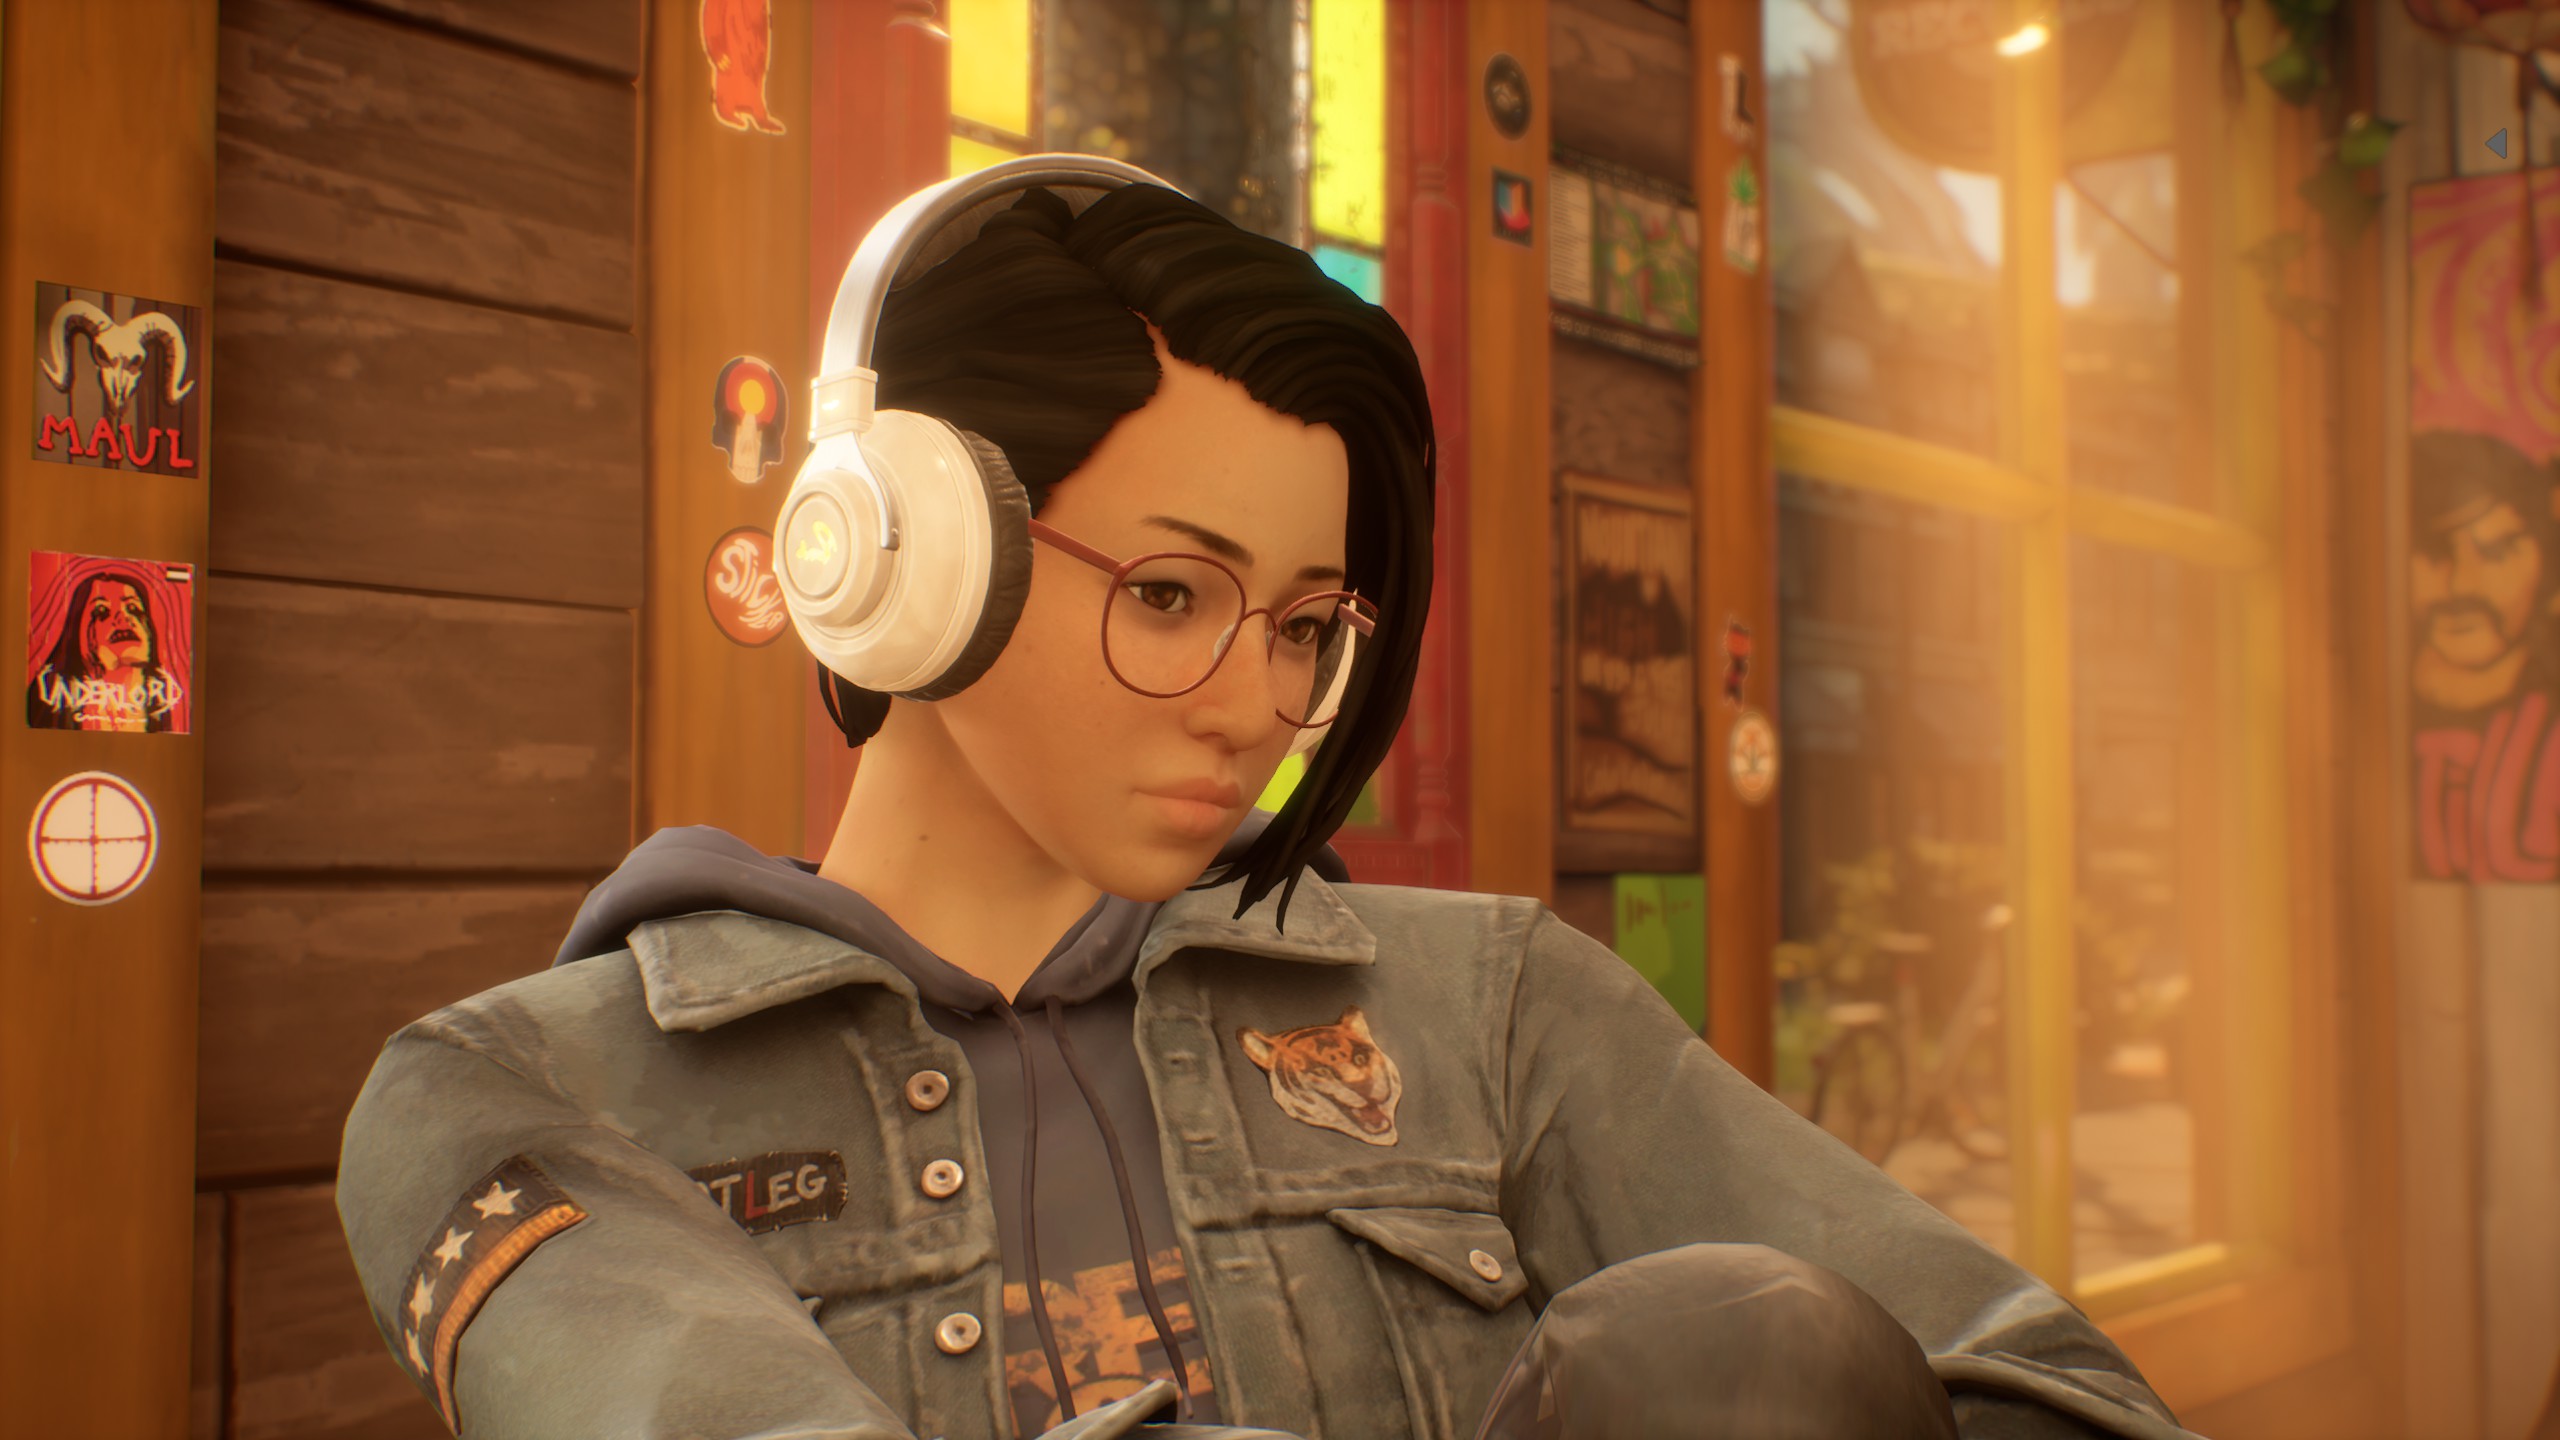 OPINION, REVIEW: 'Life Is Strange: True Colors' illustrates power of  empathy